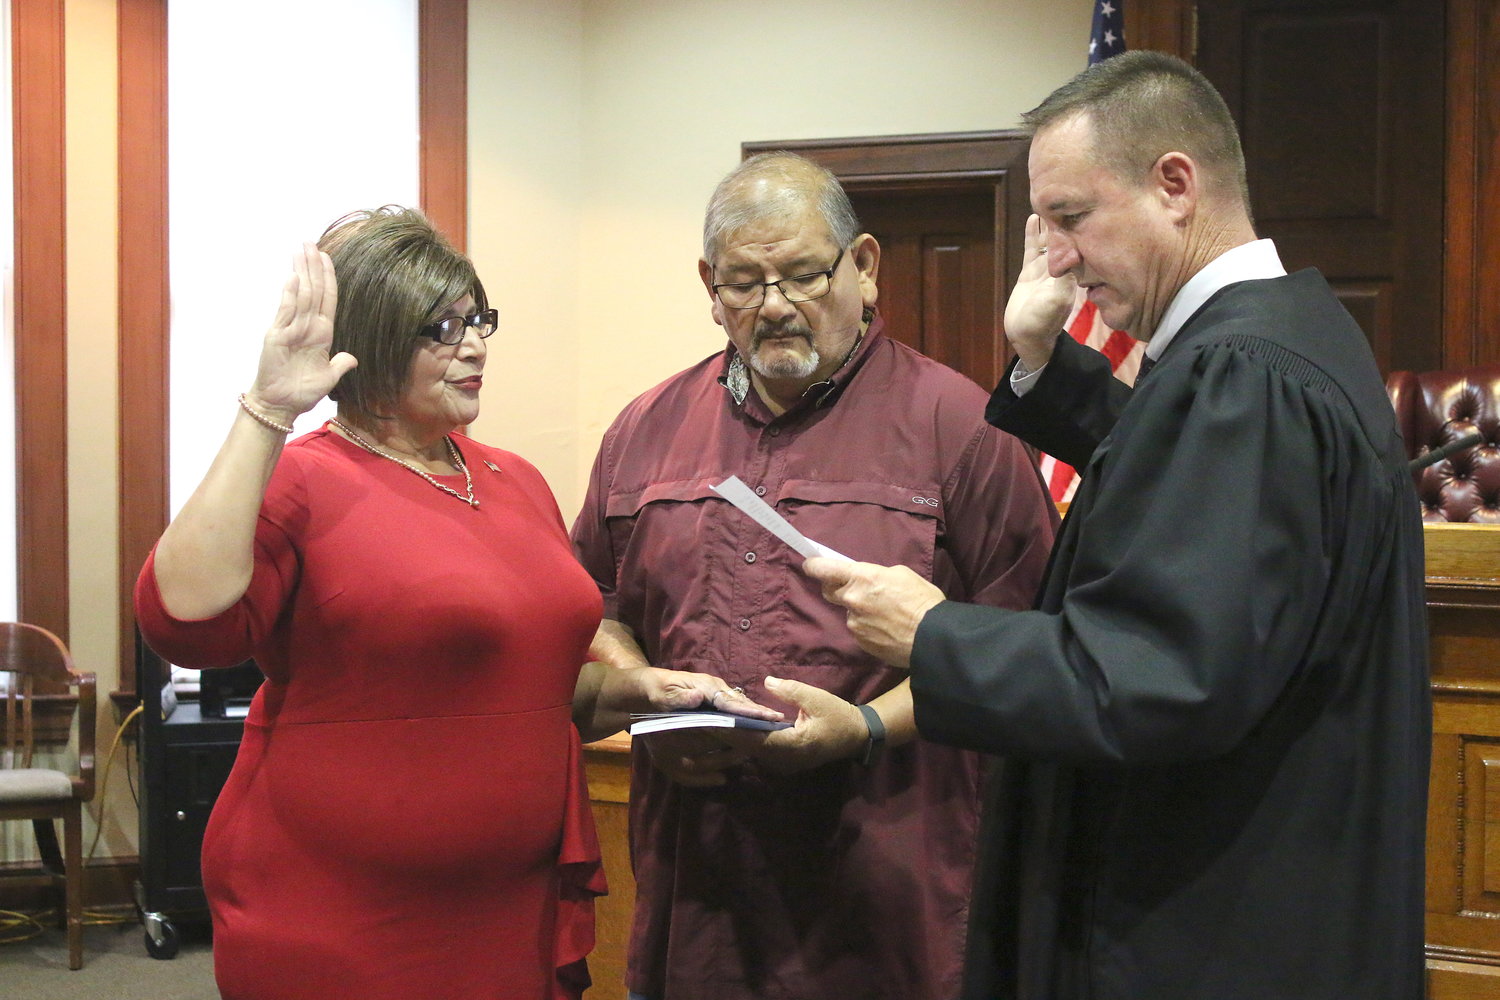 Gonzales County Judge Pat Davis, right, swears in new Smiley Mayor Lisa Dominguez Benavidez while her brother Hector holds a bible Wednesday, June 1, at the Gonzales County Courthouse. A recount conducted by Elections Administrator Gwen Schaefer and a three-person panel upheld the results of the May 7 election, in which Benavidez defeated incumbent Mayor Mike Mills by a single vote, 69-68. Benavidez, the city’s first female mayor, will preside at the June 16 City Council meeting.